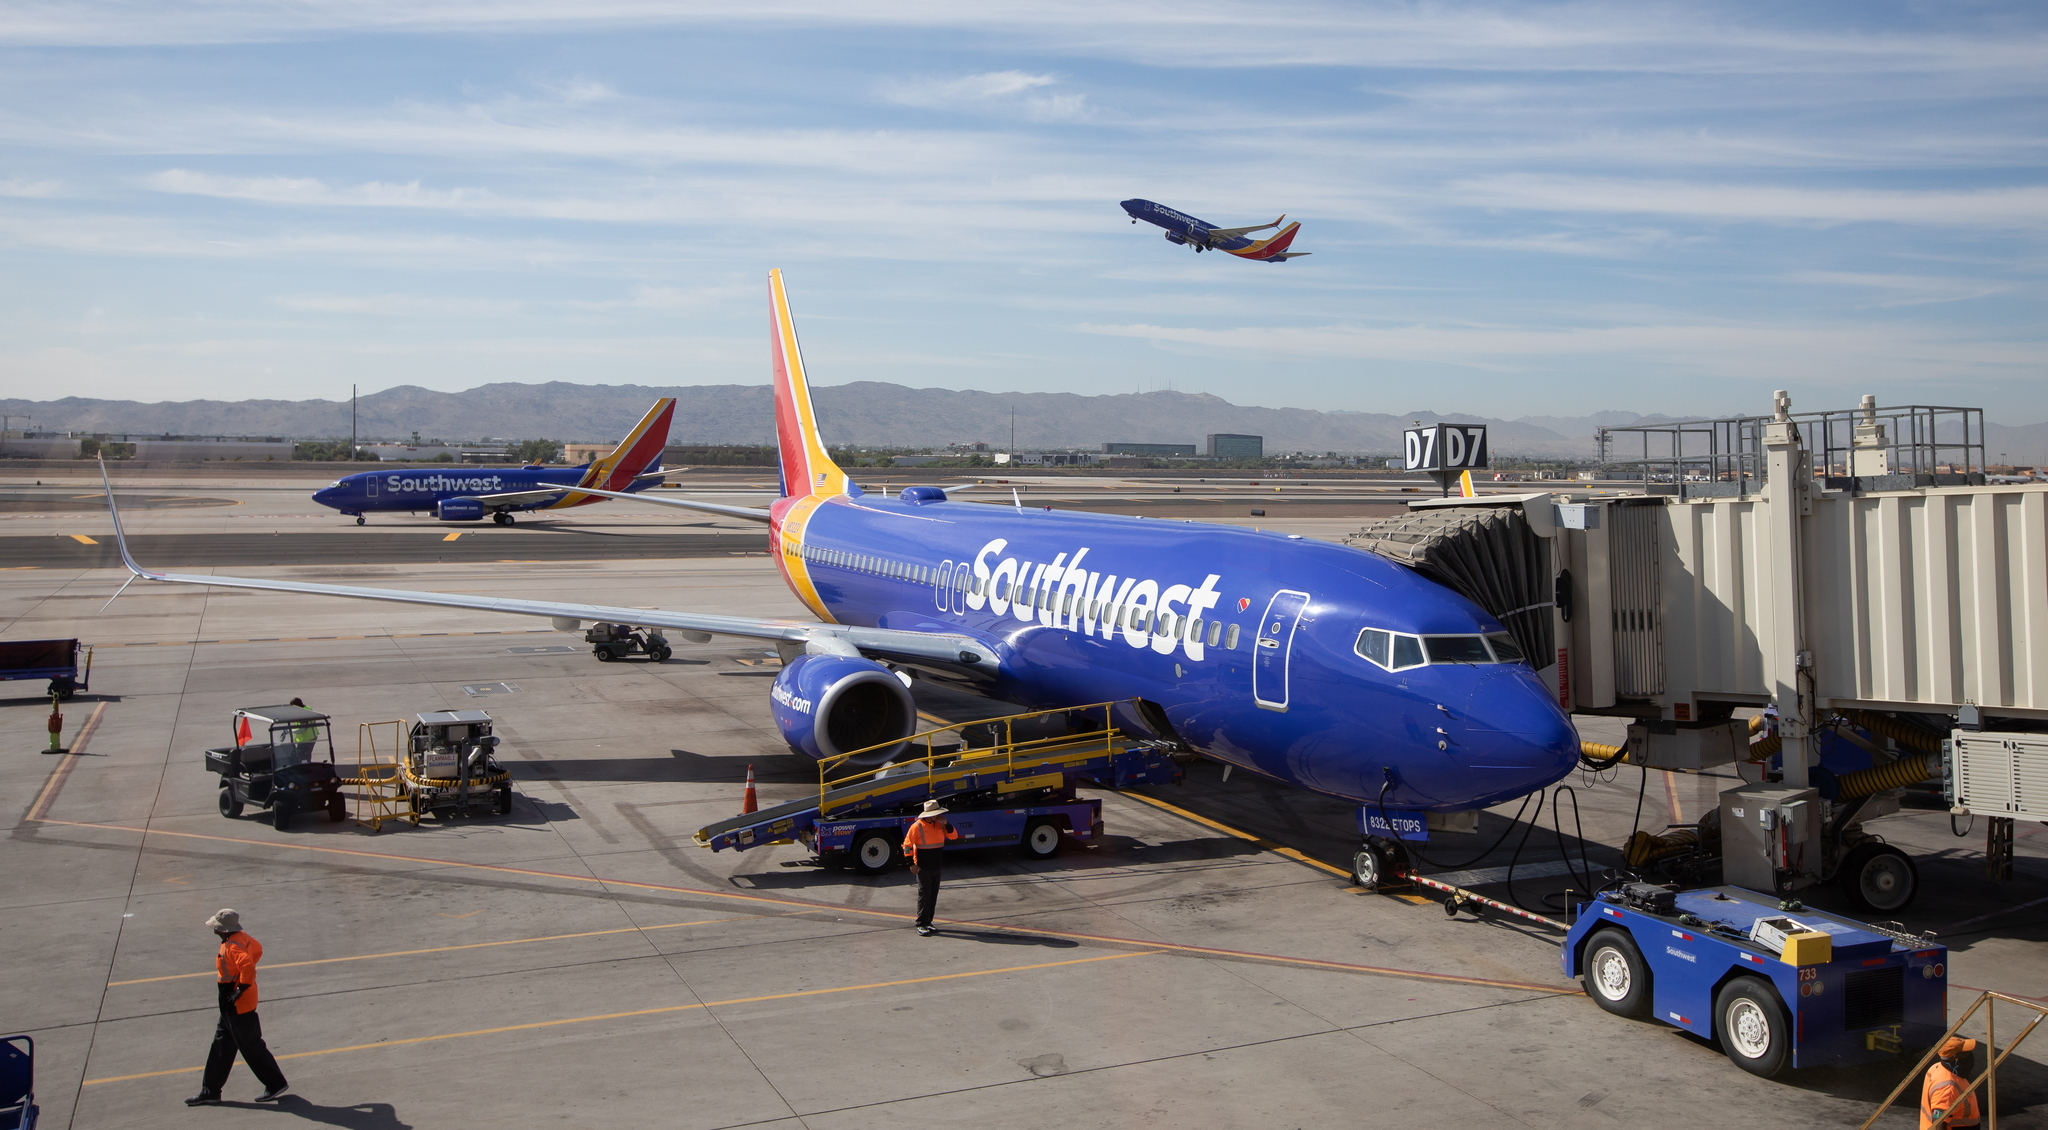 Southwest Airlines 737 at gate